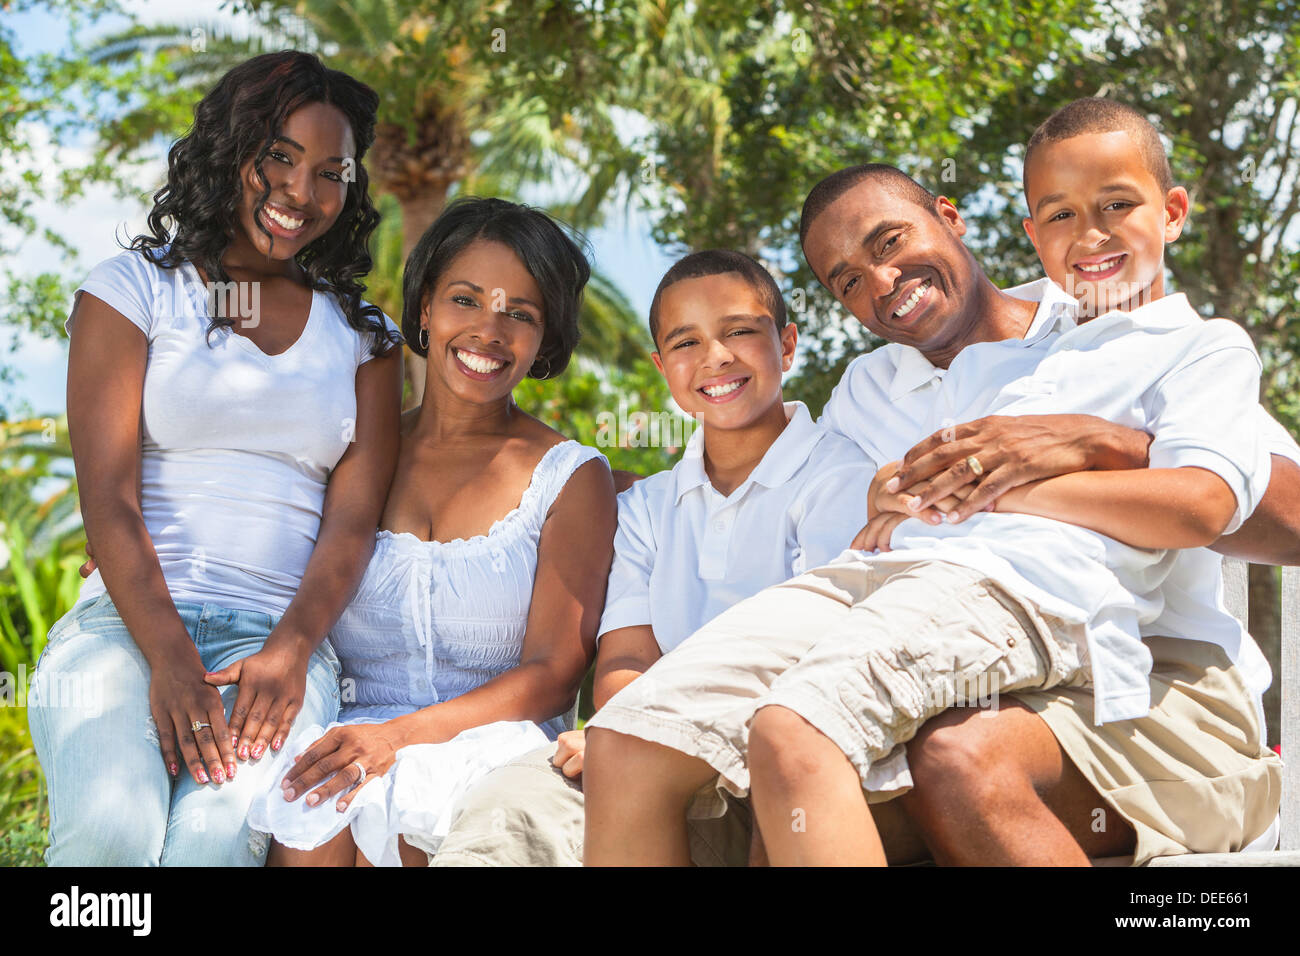 A happy black African American family of two parents and three children, two boys one girl, sitting together outside. Stock Photo